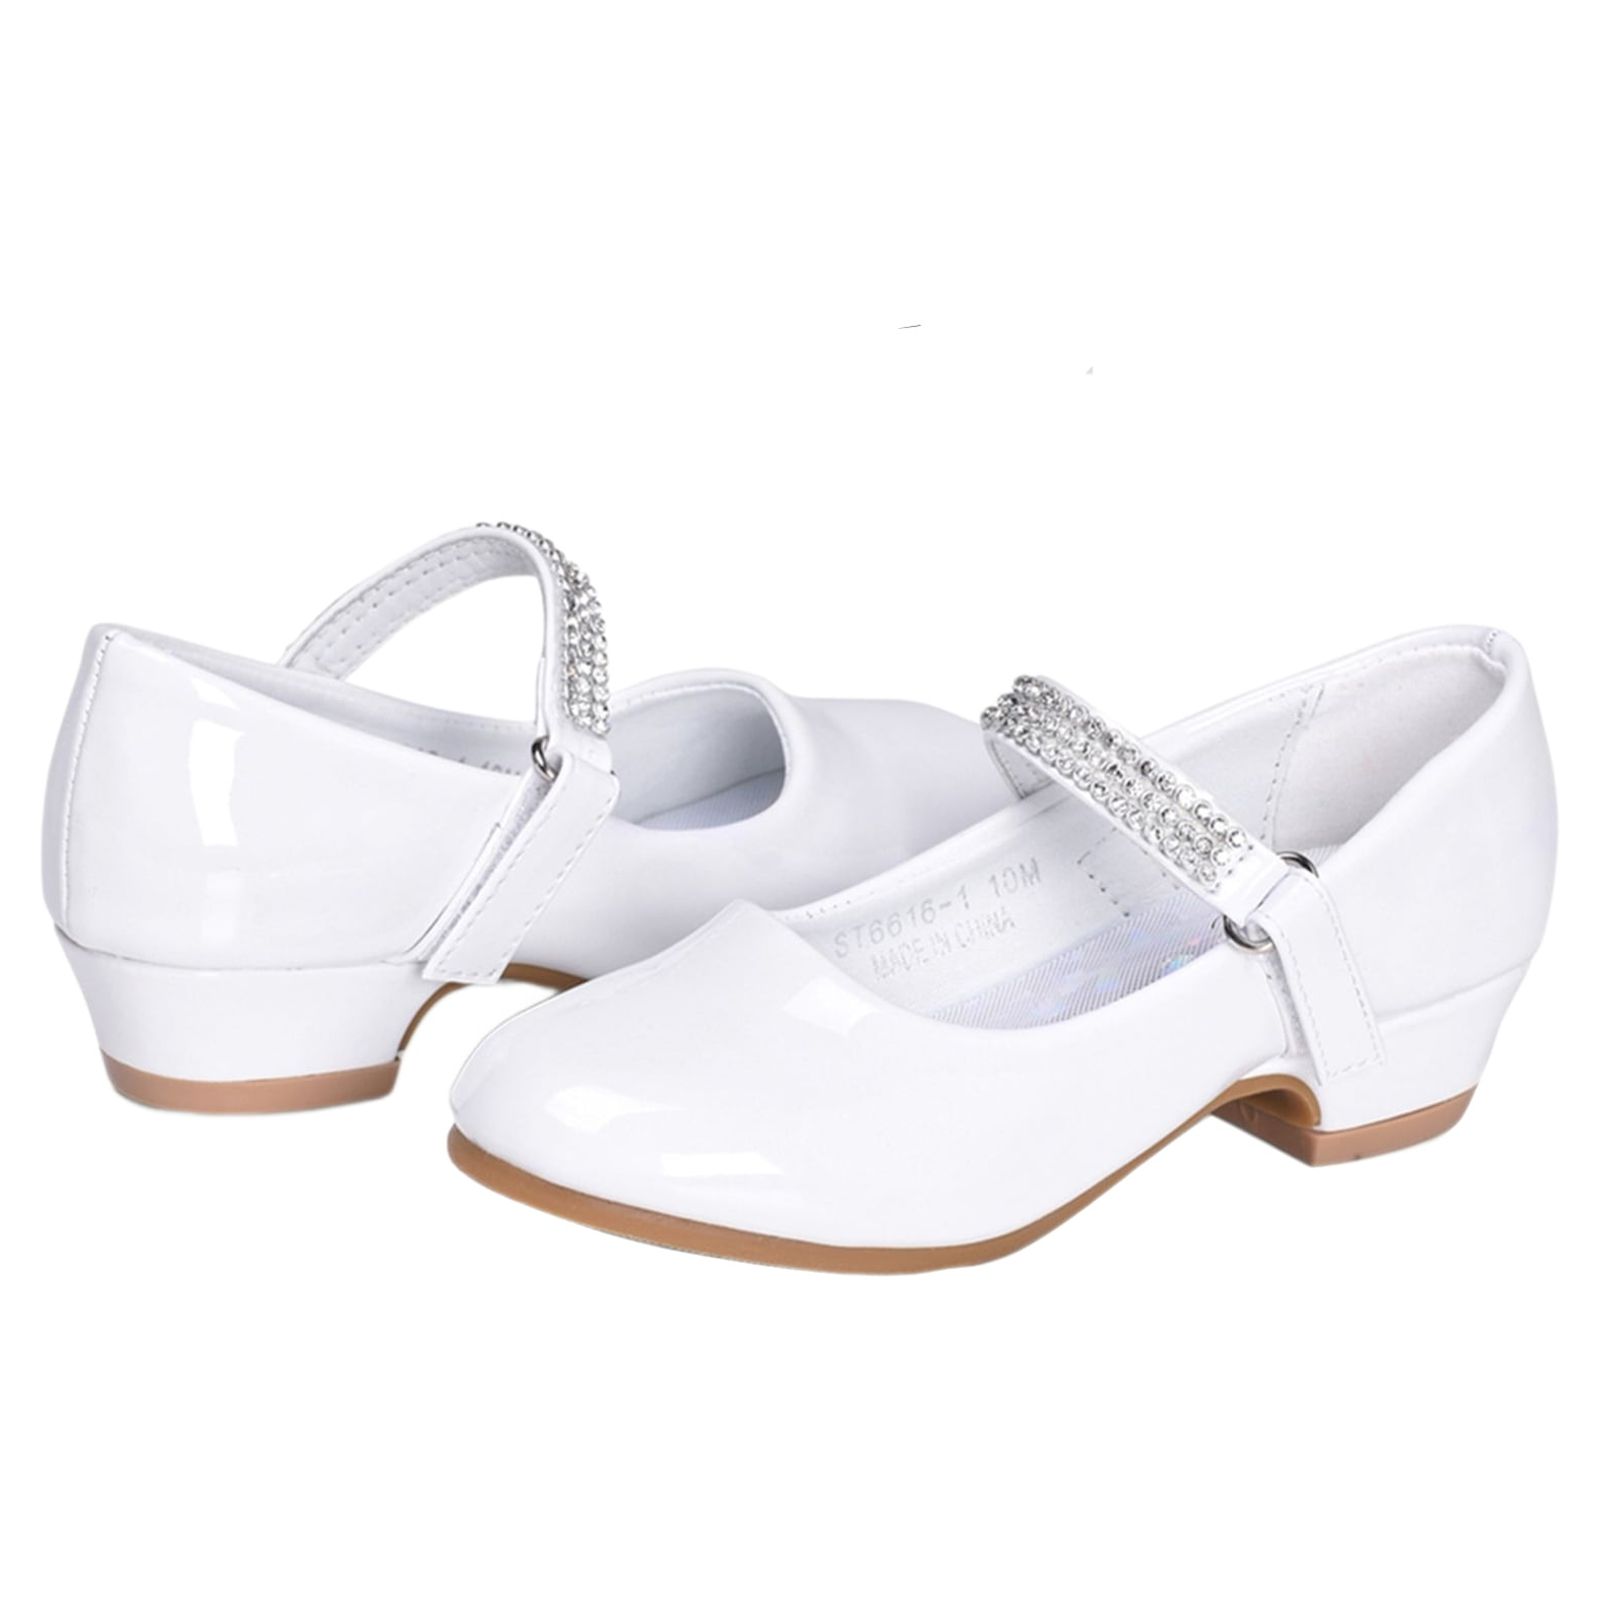 Stelle Girls Mary Jane Shoes Low Heel Princess Wedding Flower Girl Dress Shoes,Non-Slip Diamond Ankle Strap Party Flats for Kids,White - image 1 of 7